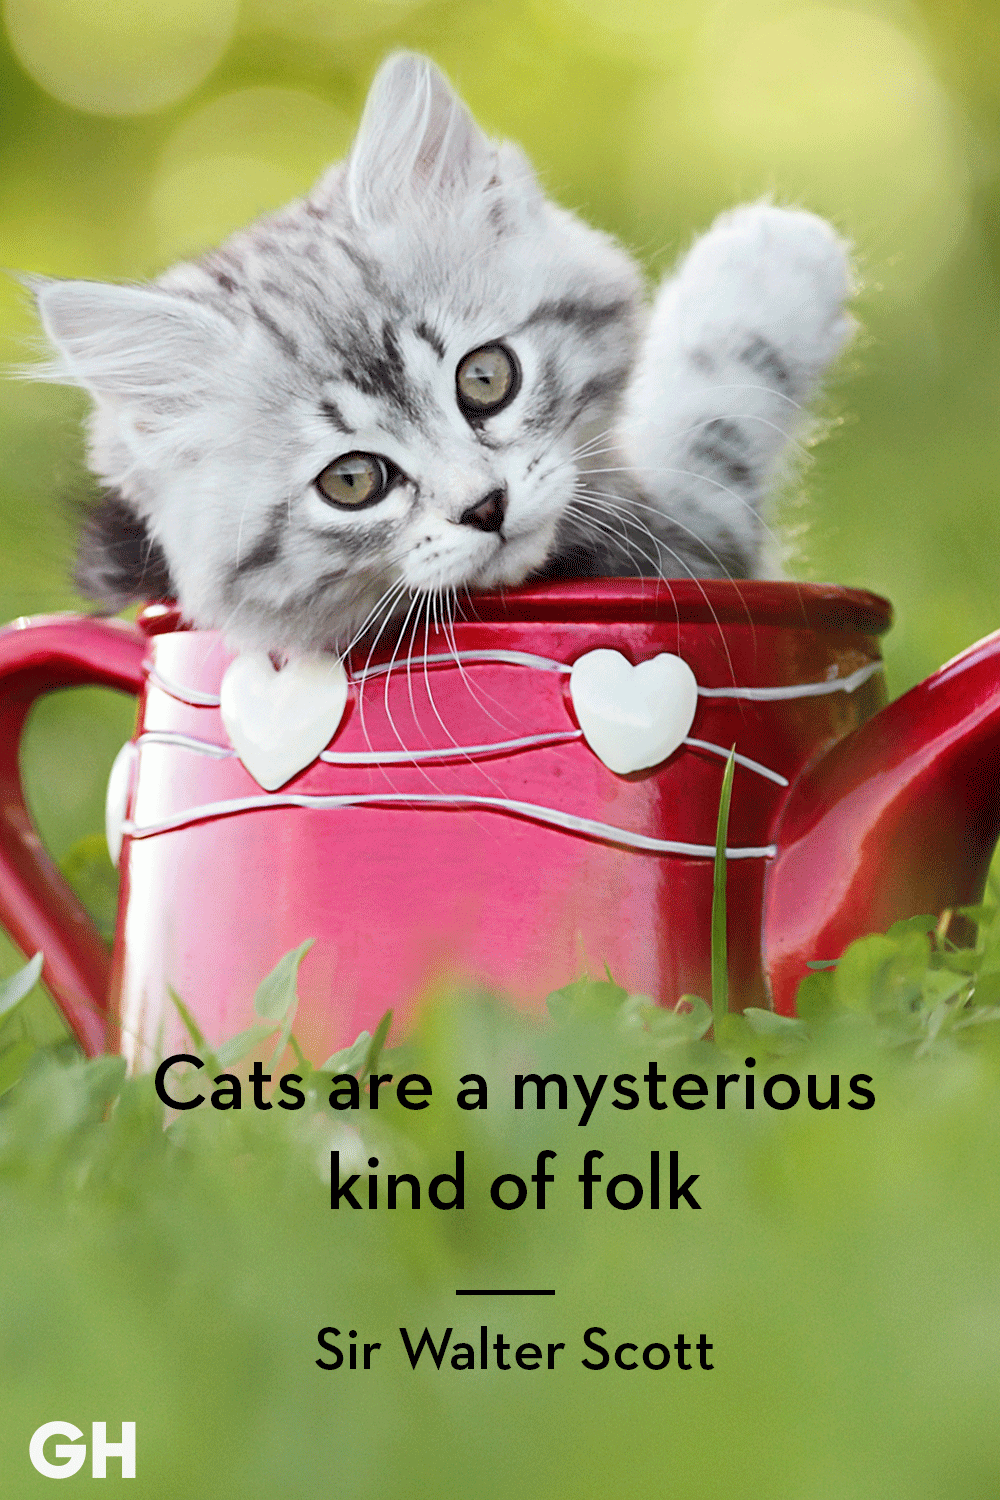 cute kittens with love captions